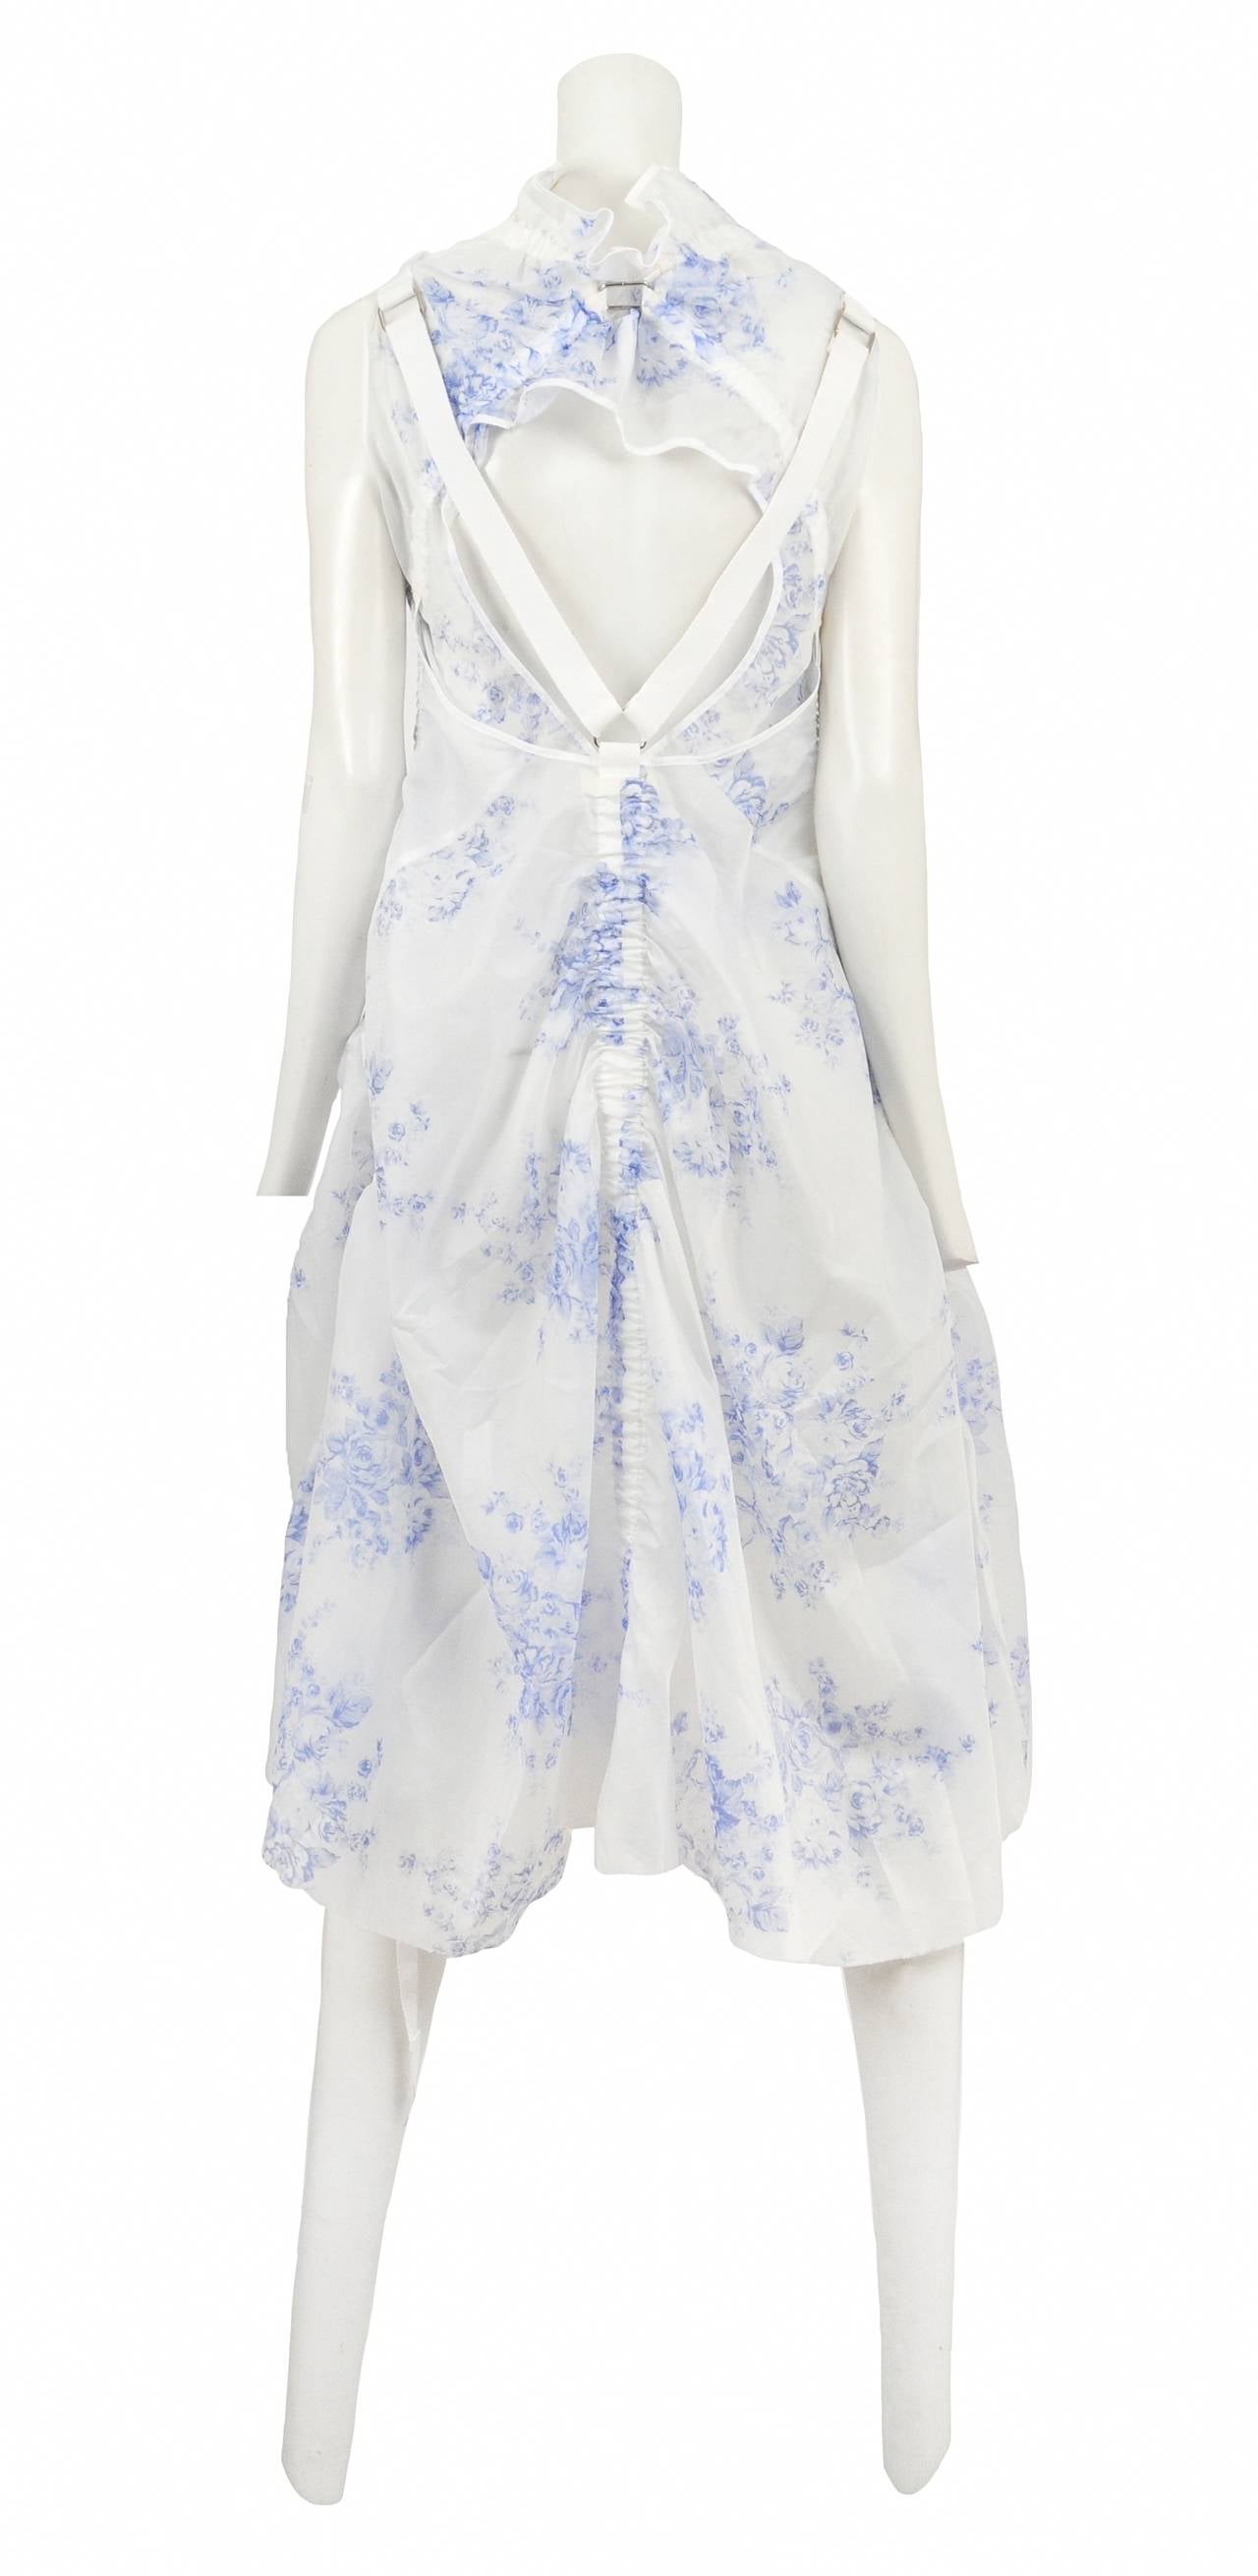 Vintage Junya Watanabe for Comme des Garcons sleeveless white and blue floral parachute dress with white trim. Circa 2002.